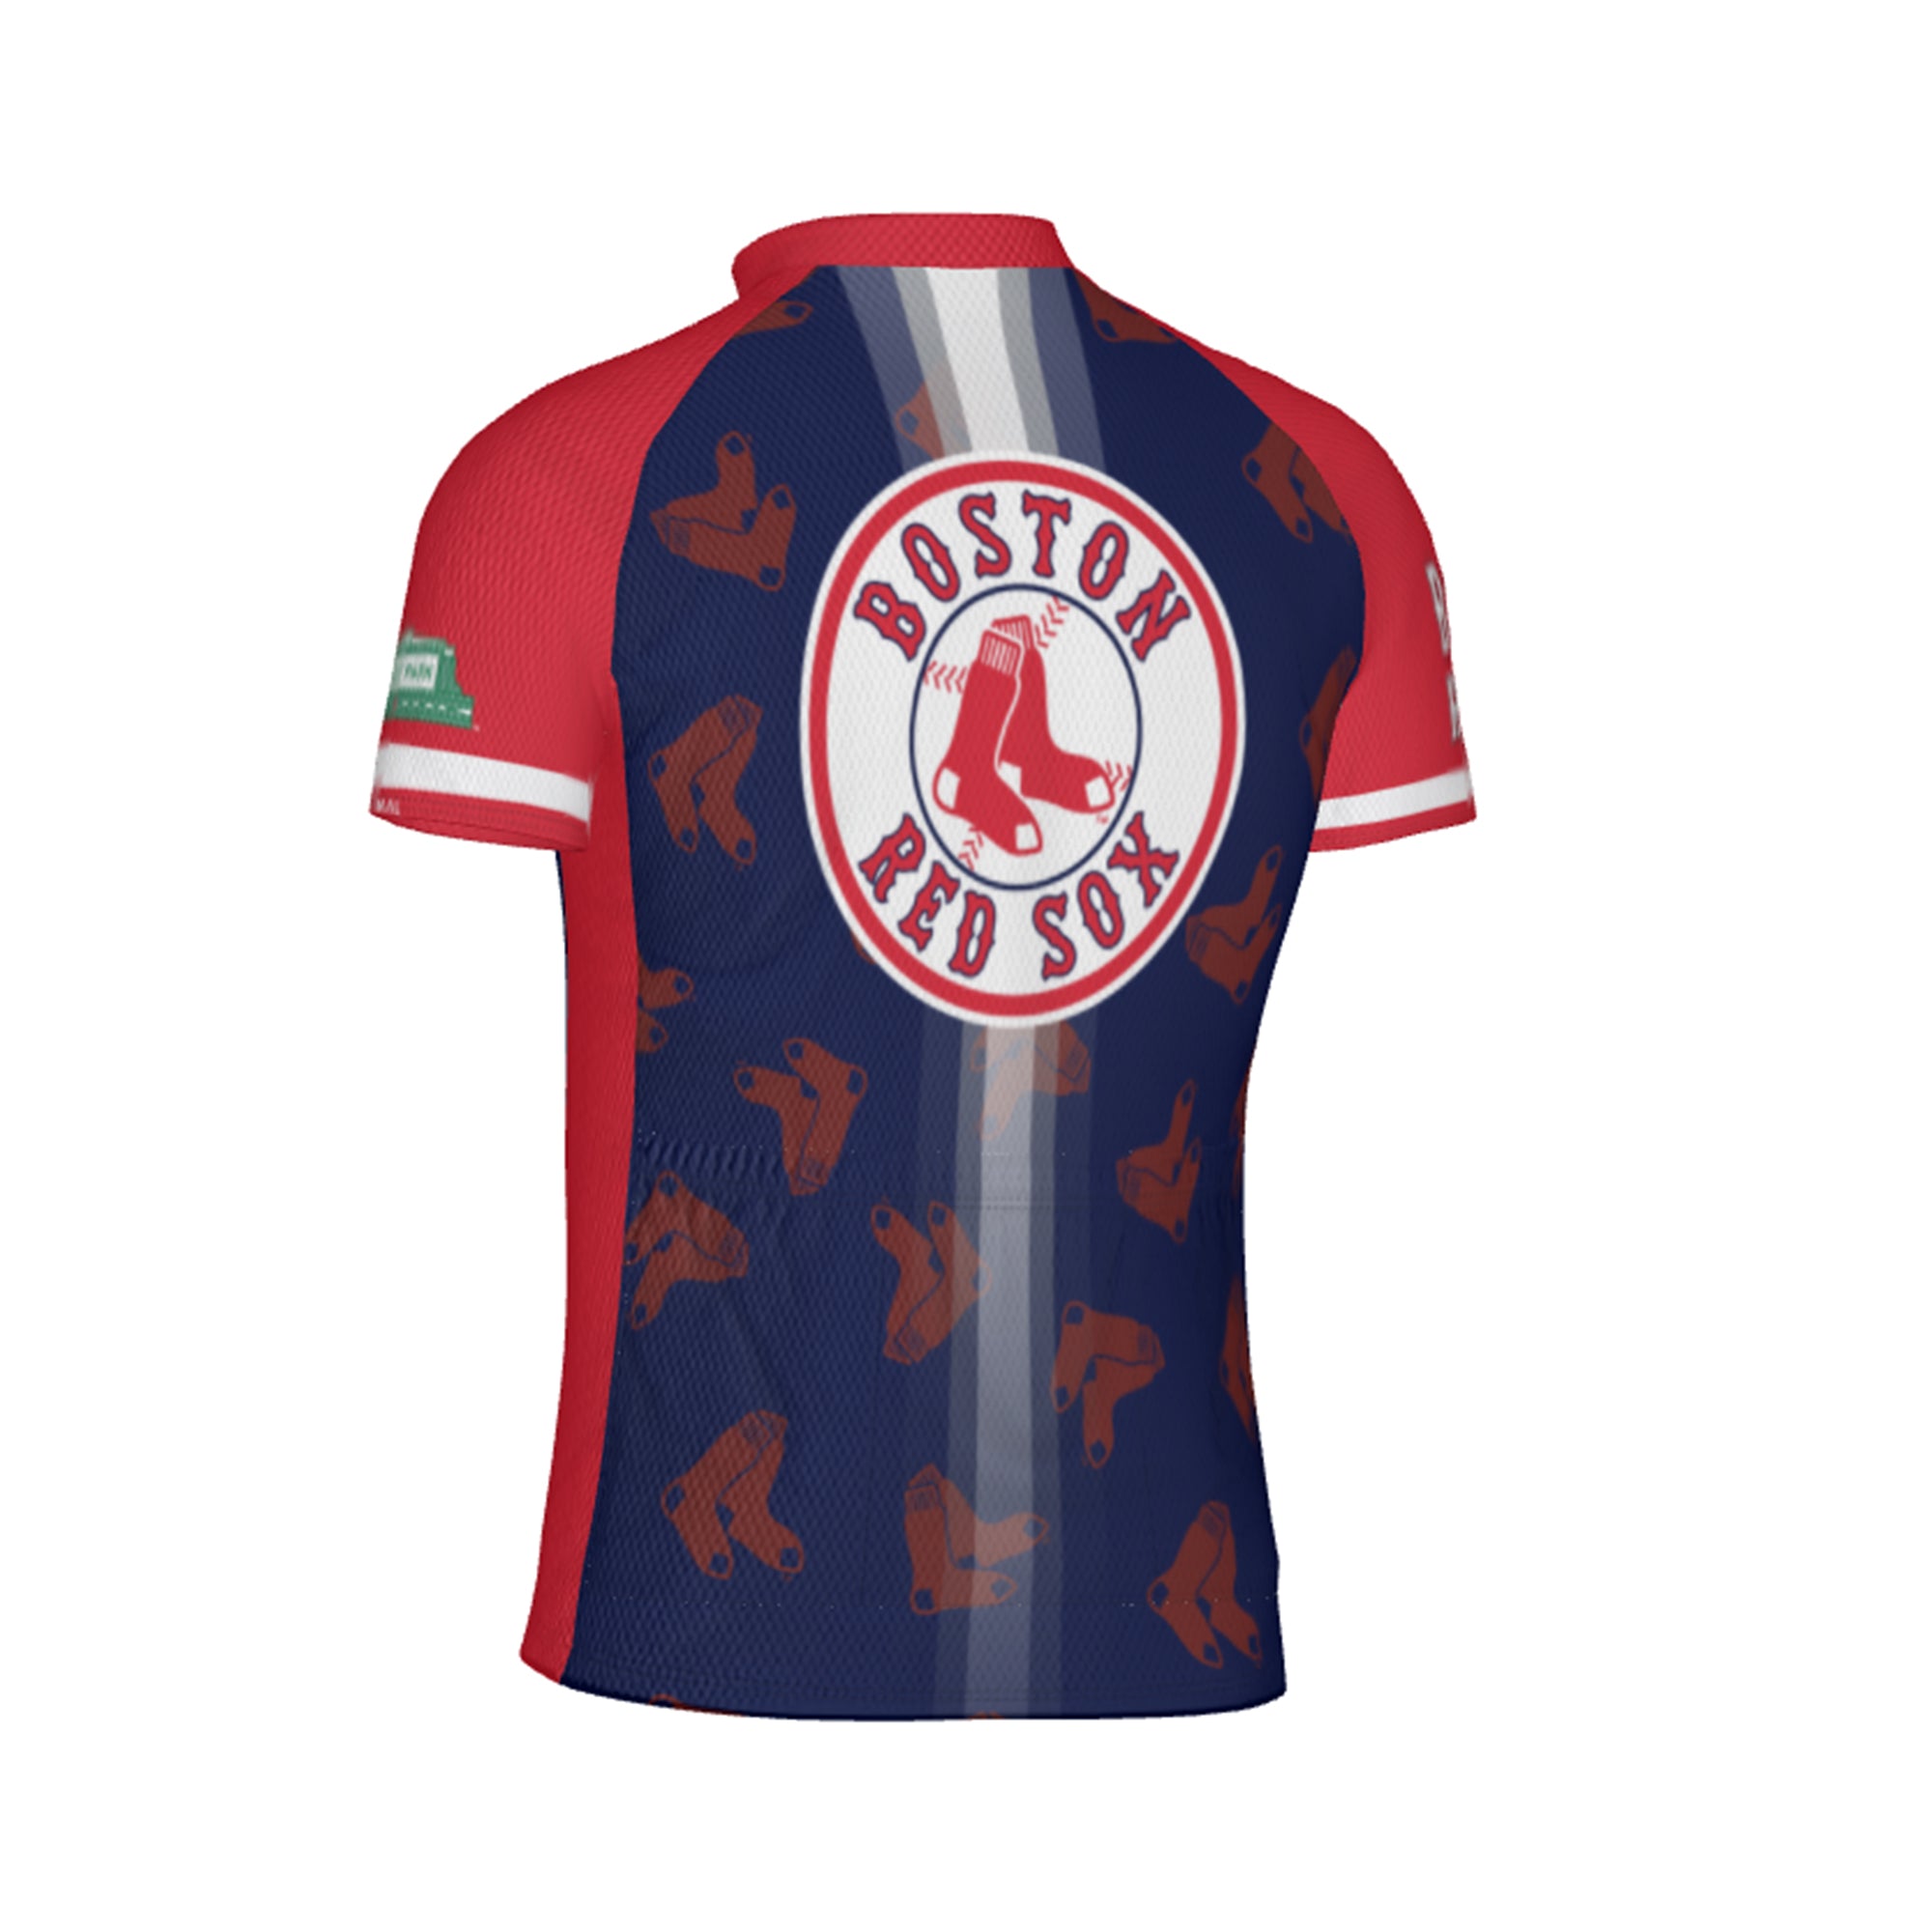 Boston Red Sox: Uniforms, PMell2293